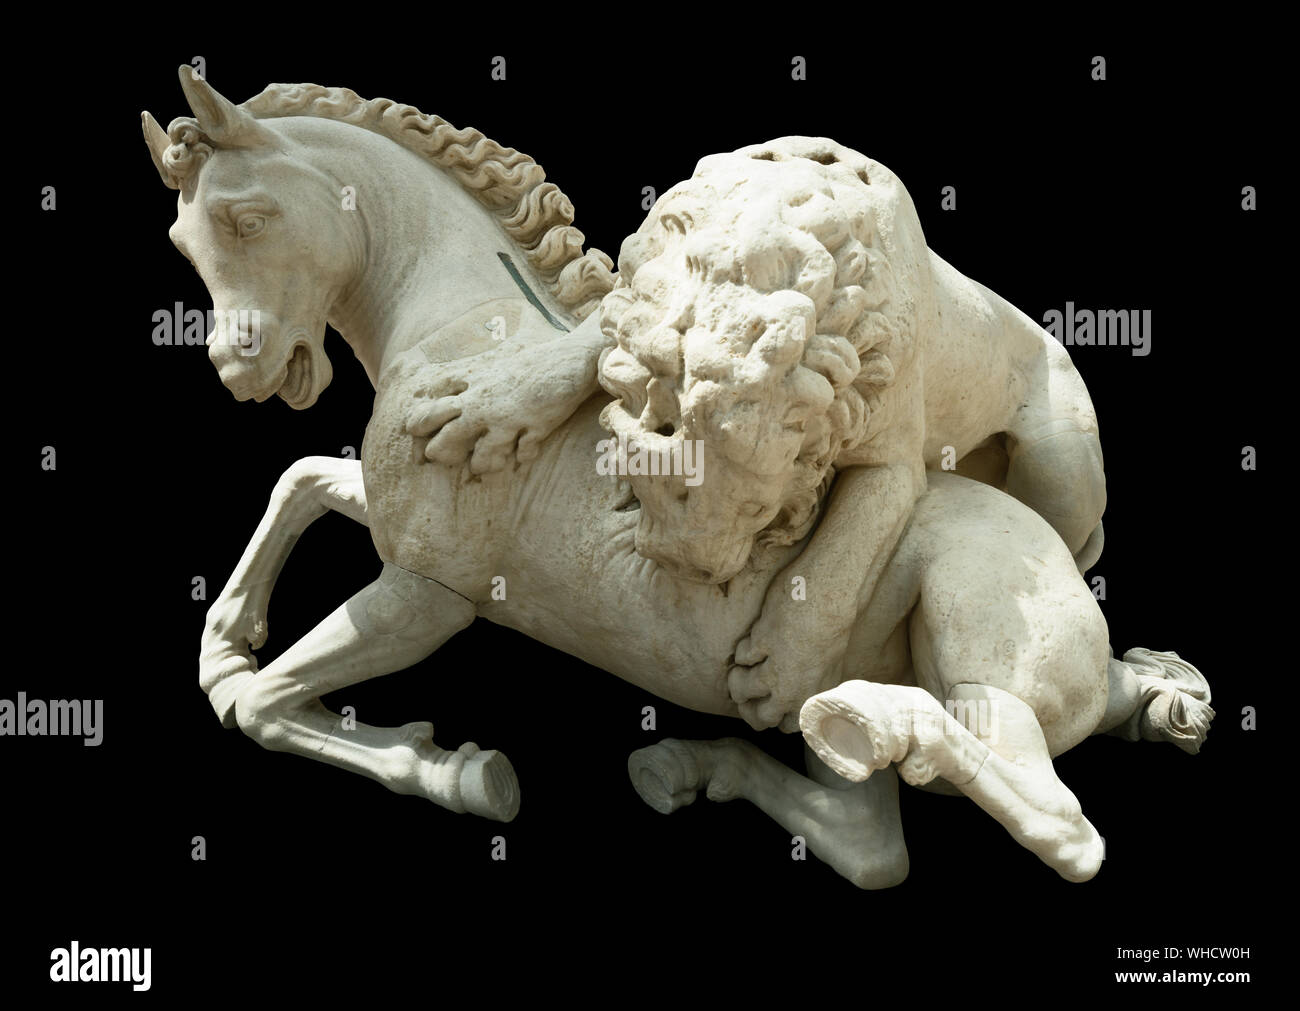 Lion biting the horse. Statue in Capitoline Museums, Rome, Italy. Isolated on black Stock Photo